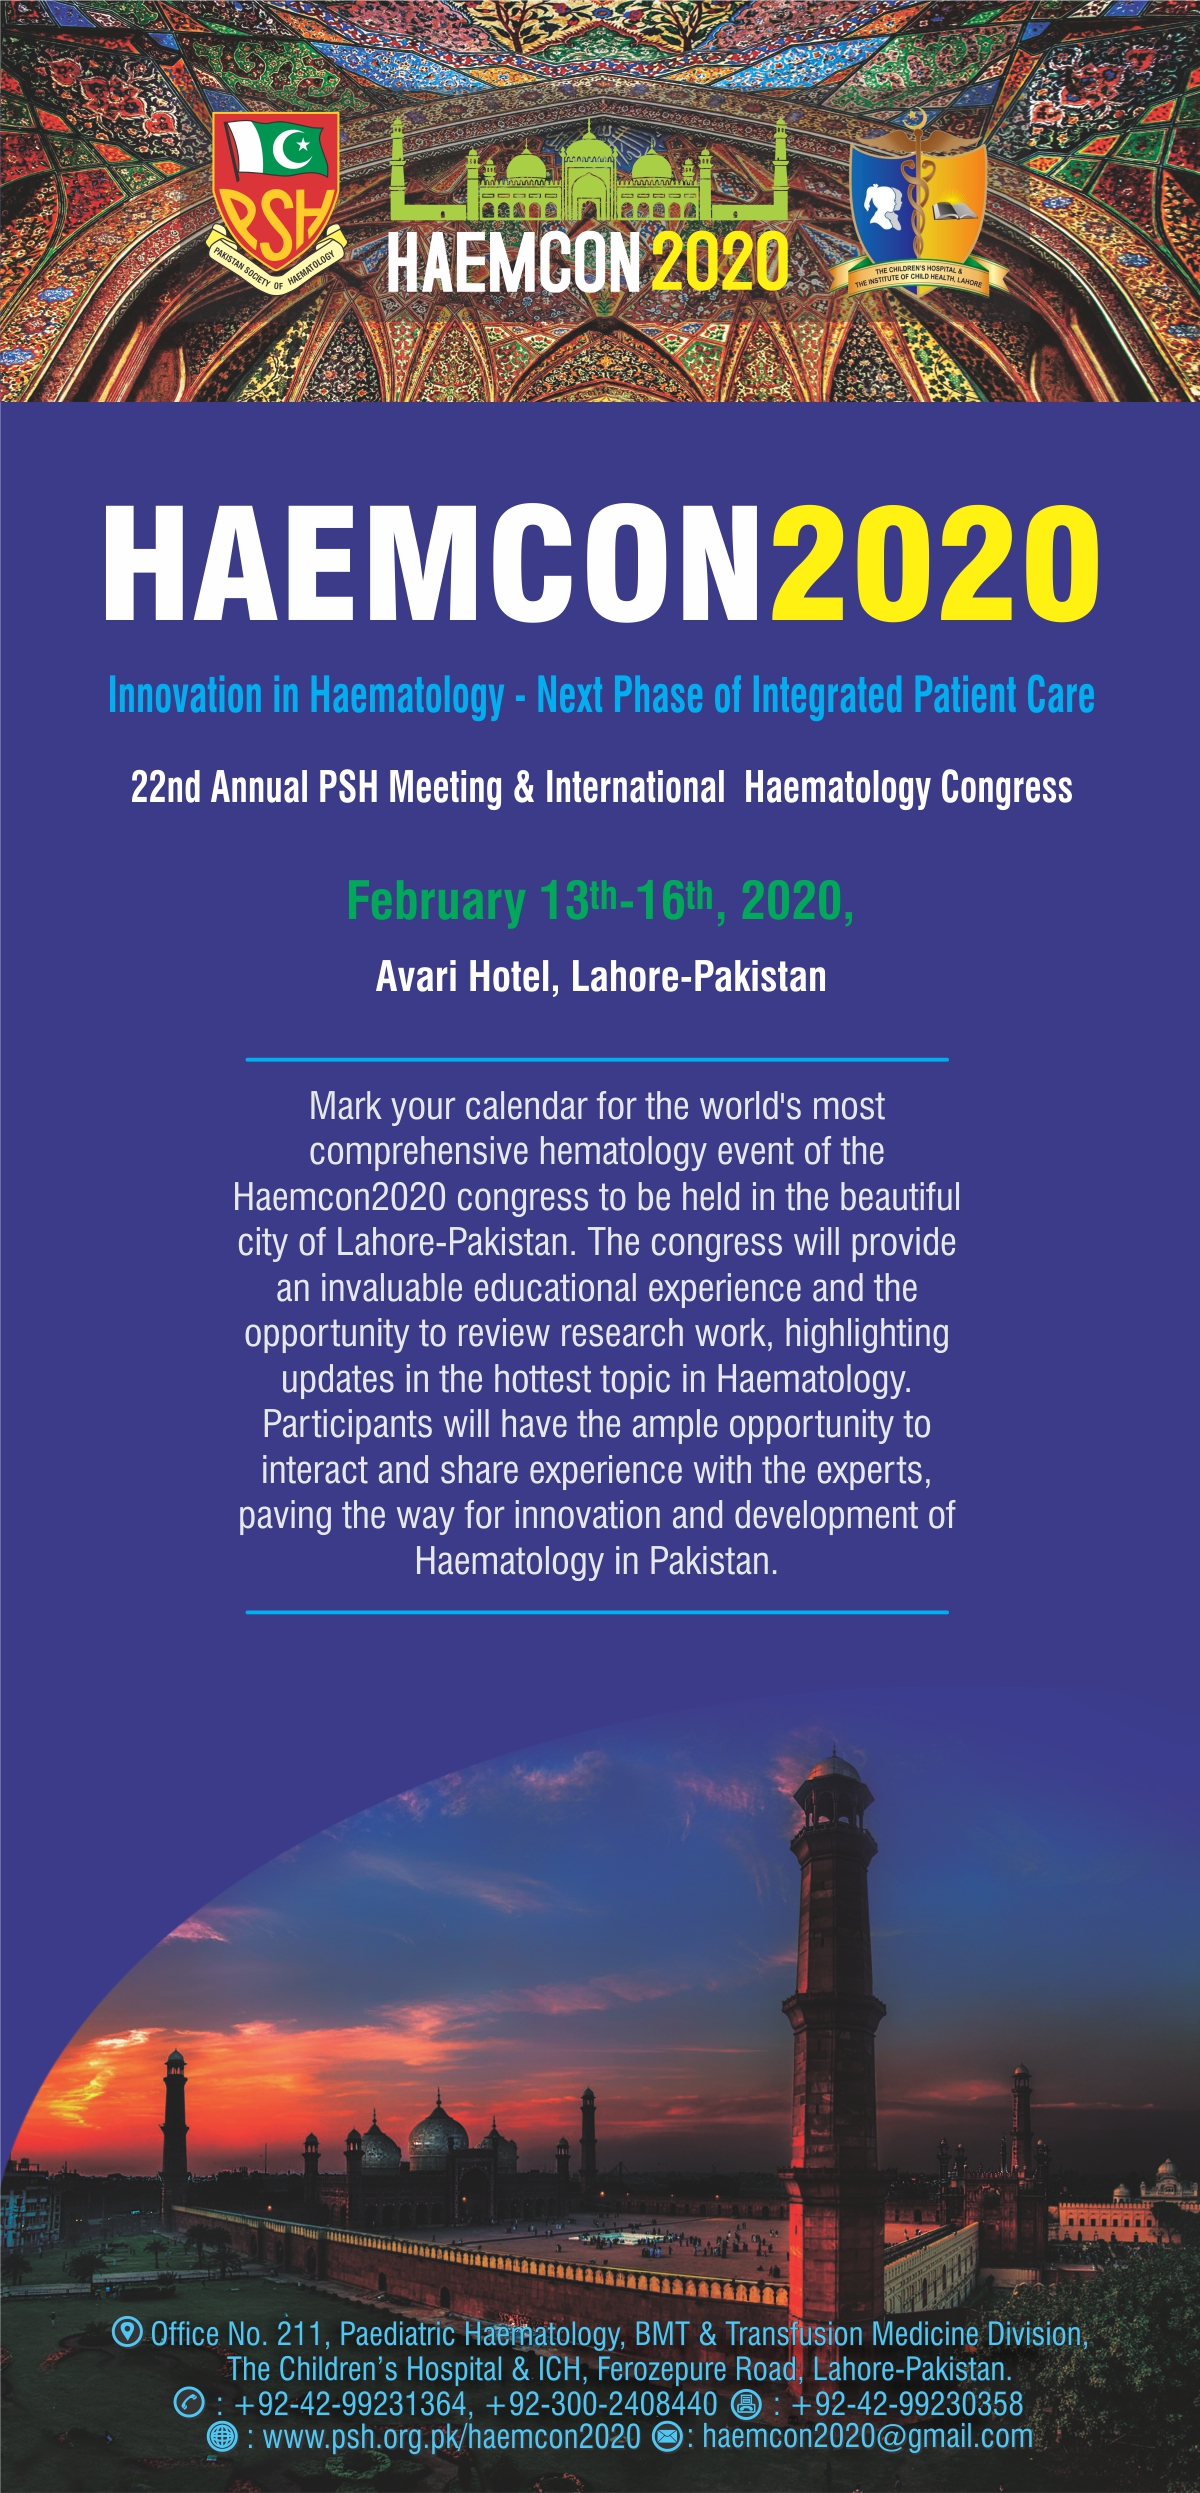 Innovation in Haematology - Next Phase of Integrated Patient Care | 22nd Annual PSH Meeting & International Haematology Congress | February 13 - 16, 2020 | Avari Hotel, Lahore - Pakistan